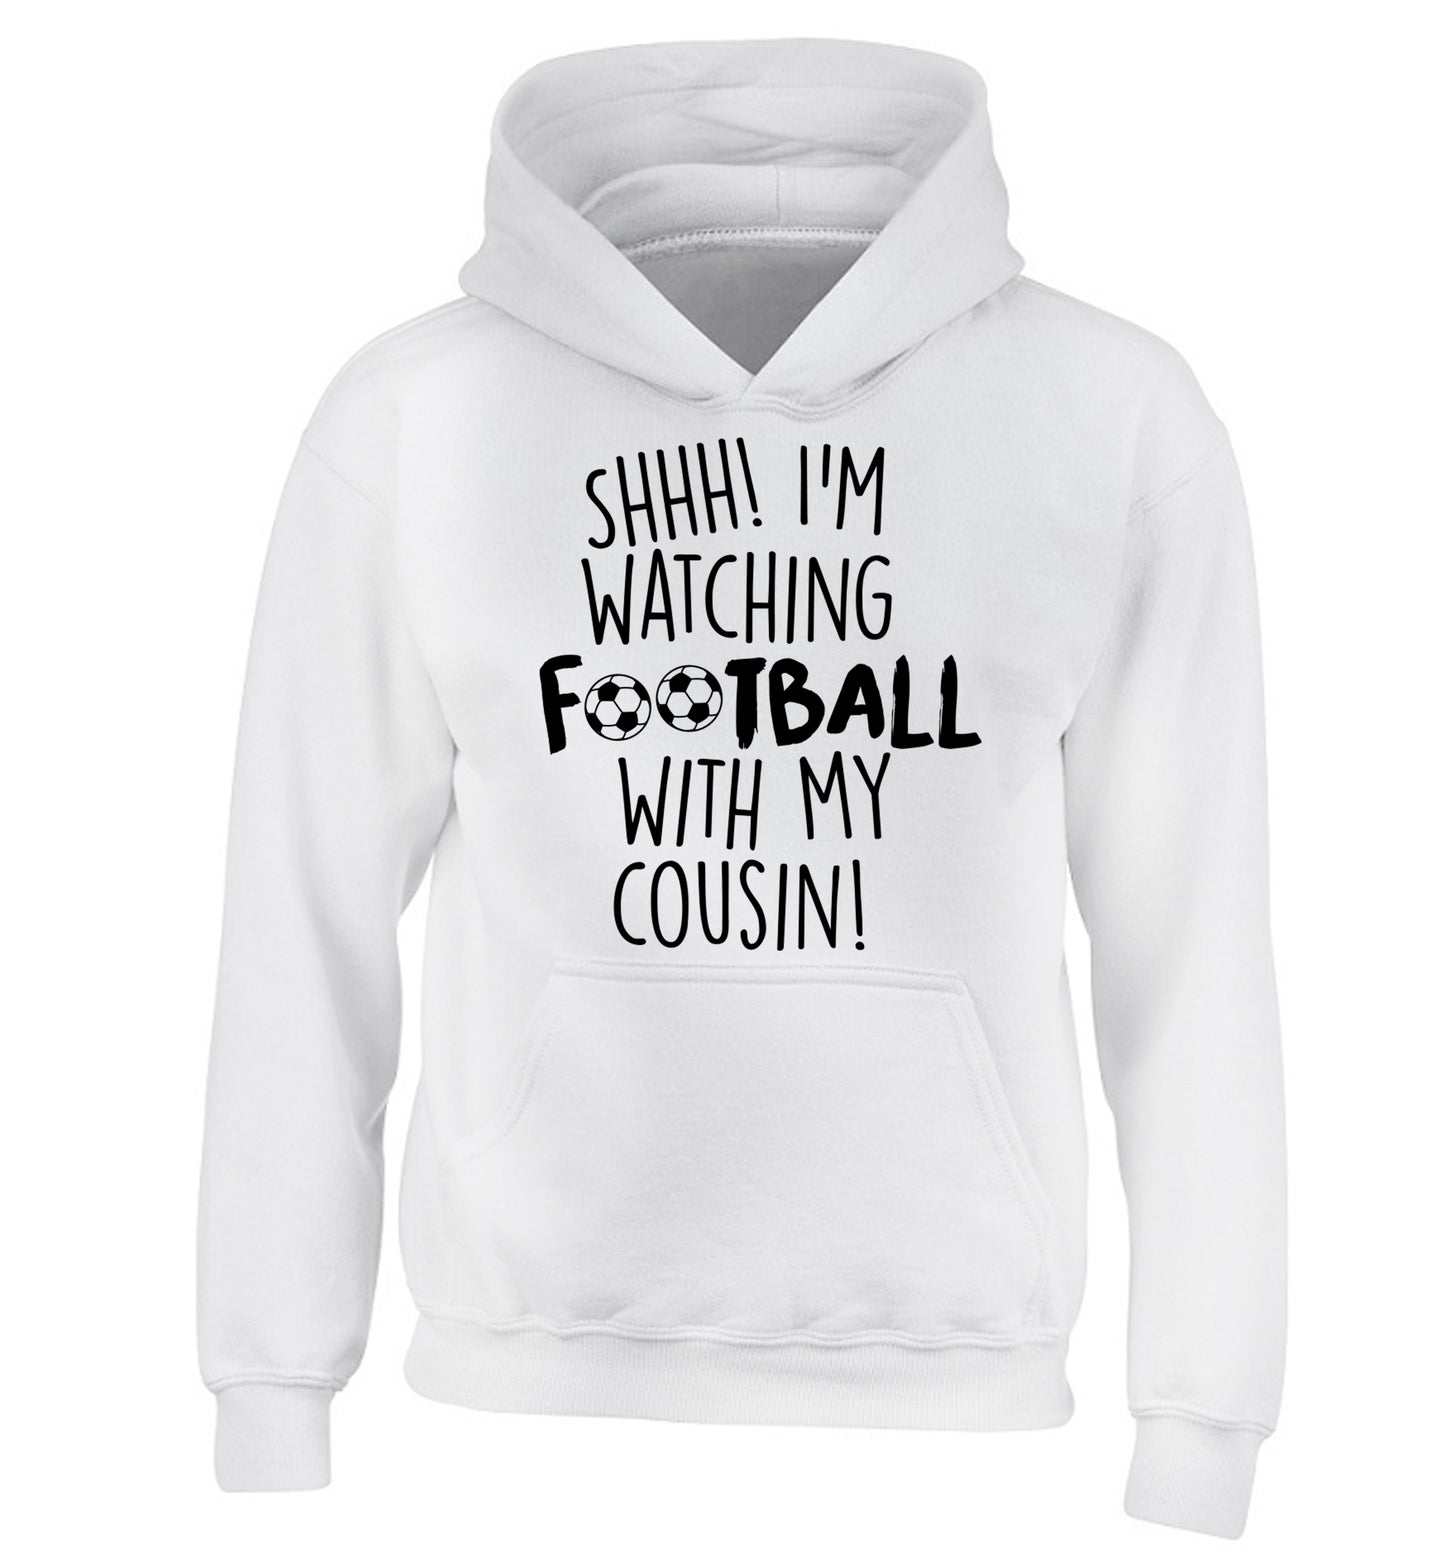 Shhh I'm watching football with my cousin children's white hoodie 12-14 Years